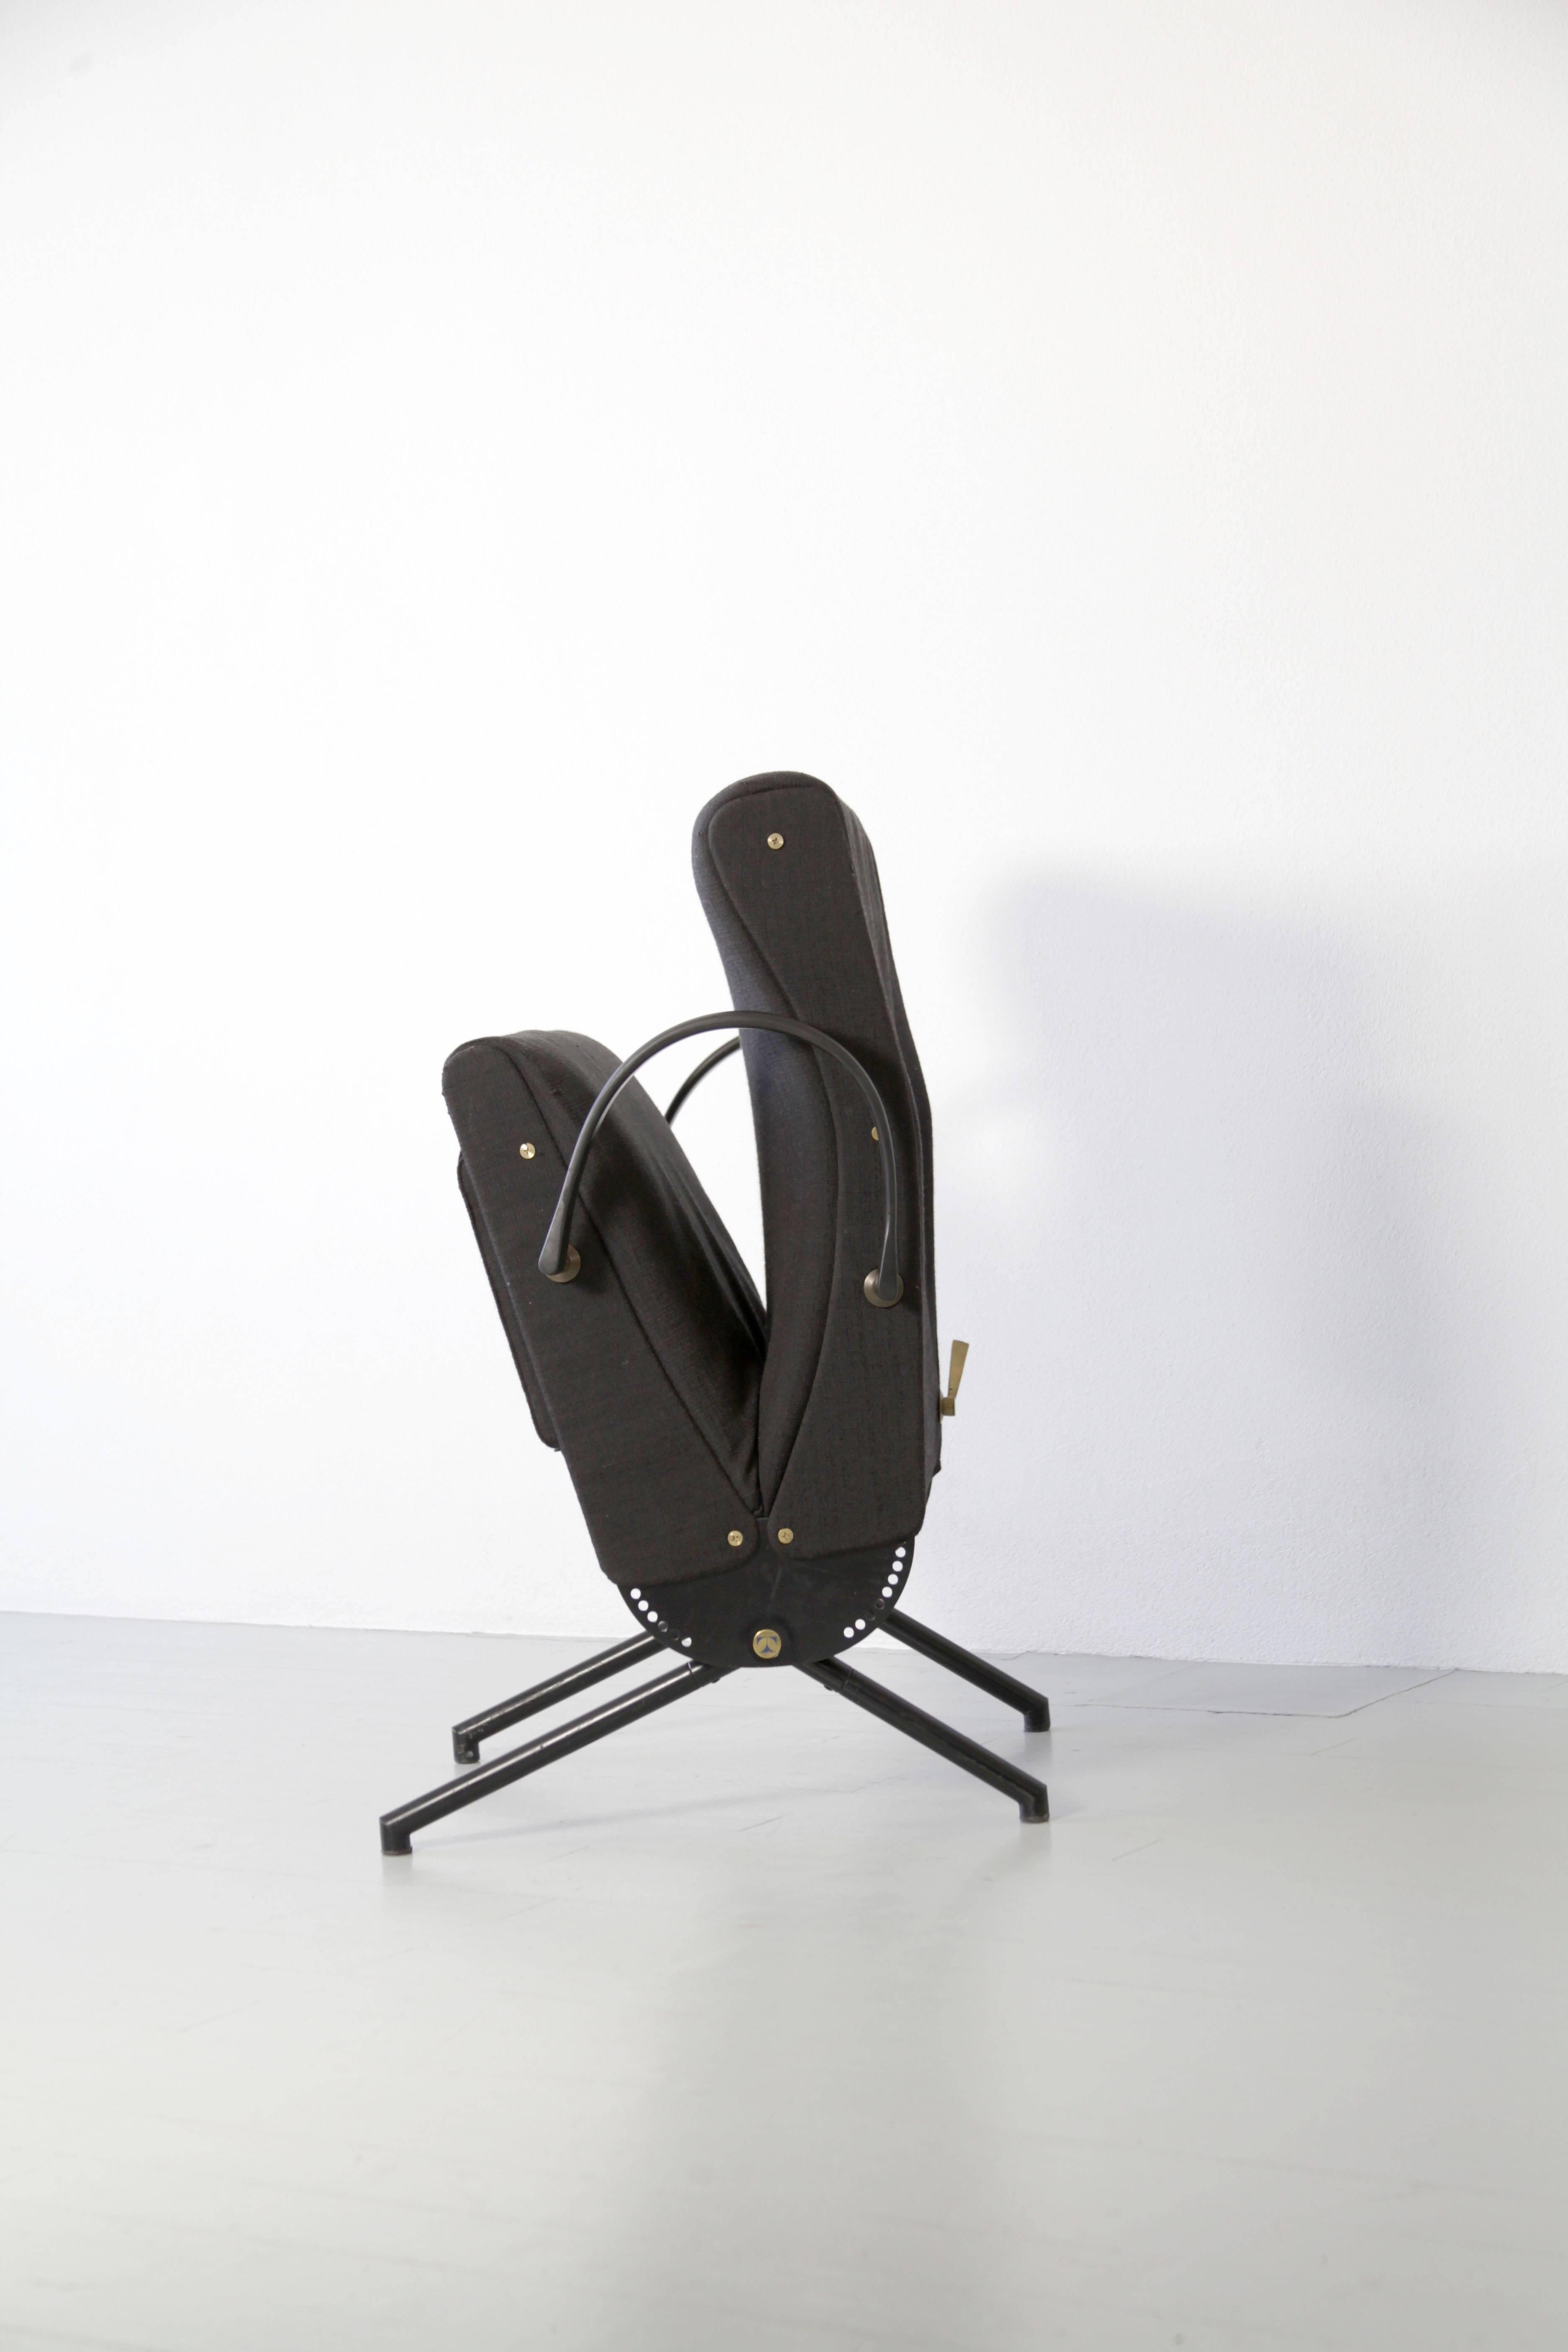 1st edition P40 armchair designed by Osvaldo Borsani in the 1950s and made by Tecno in Italy. The chair can be change into different positions. The seat, back and the footrest are adjustable separately from each other. The mechanisms are fully